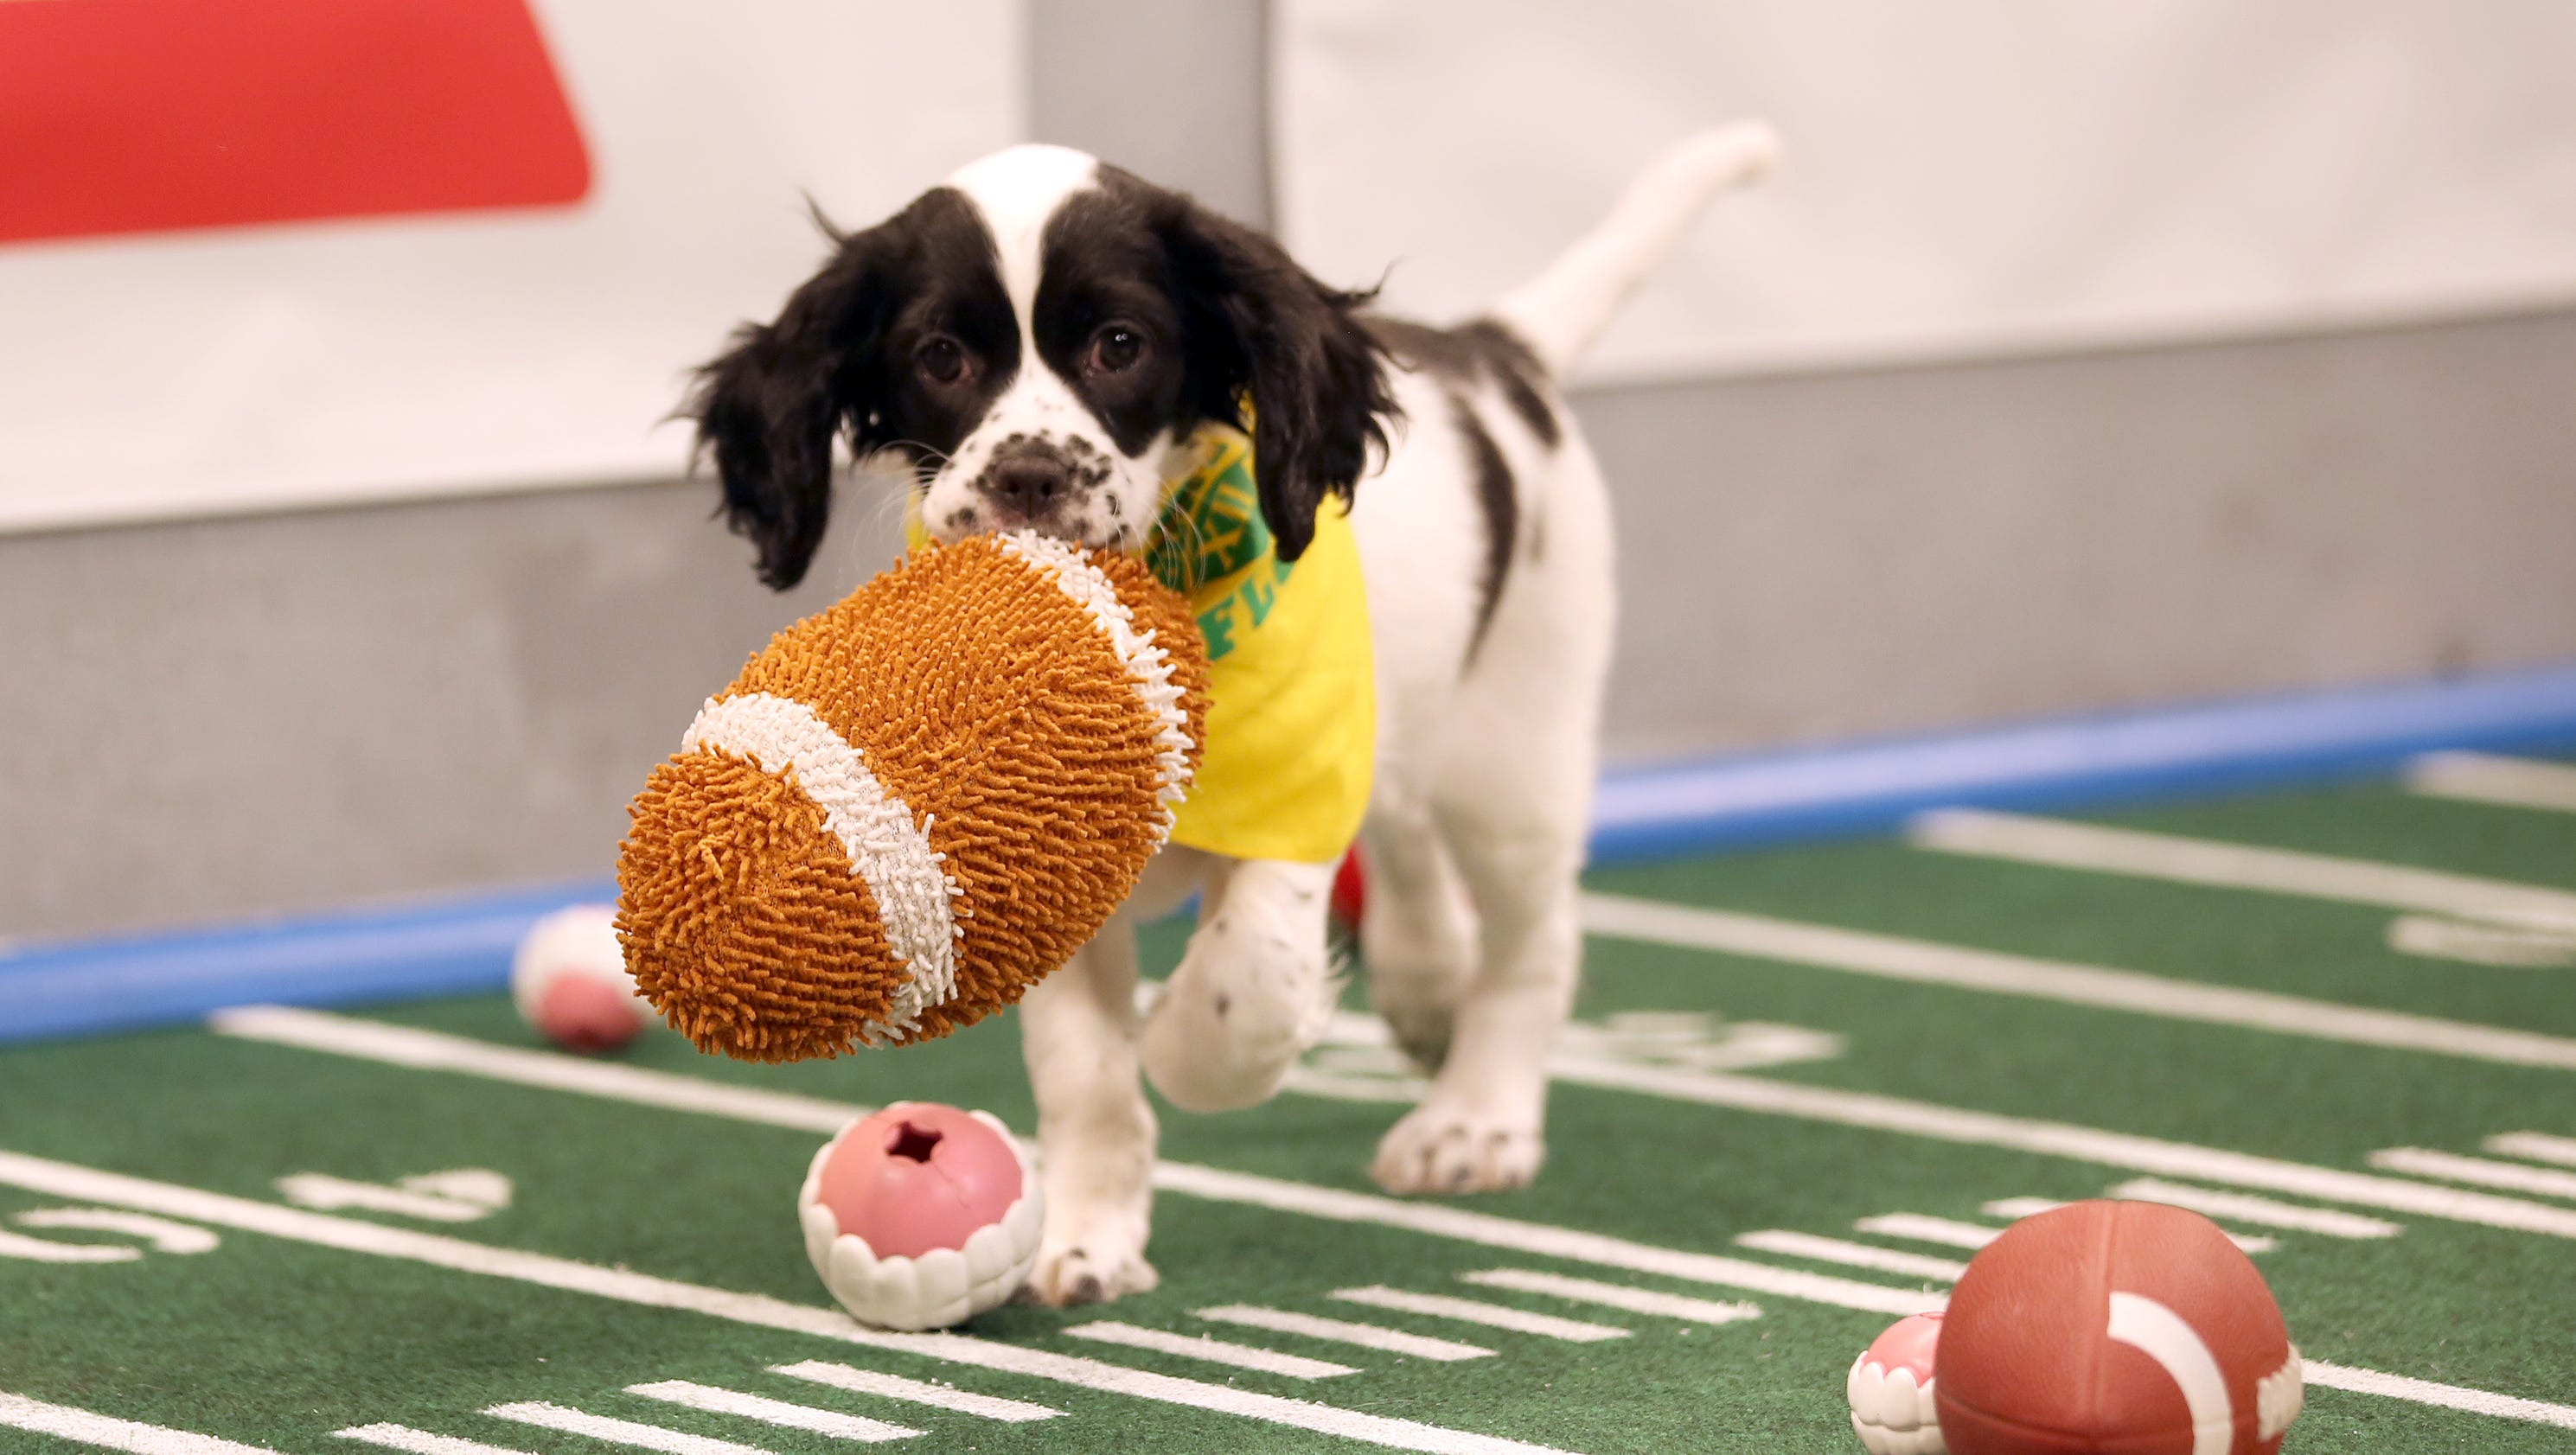 Puppy Bowl could bring new hope for Houston shelter dogs3200 x 1680